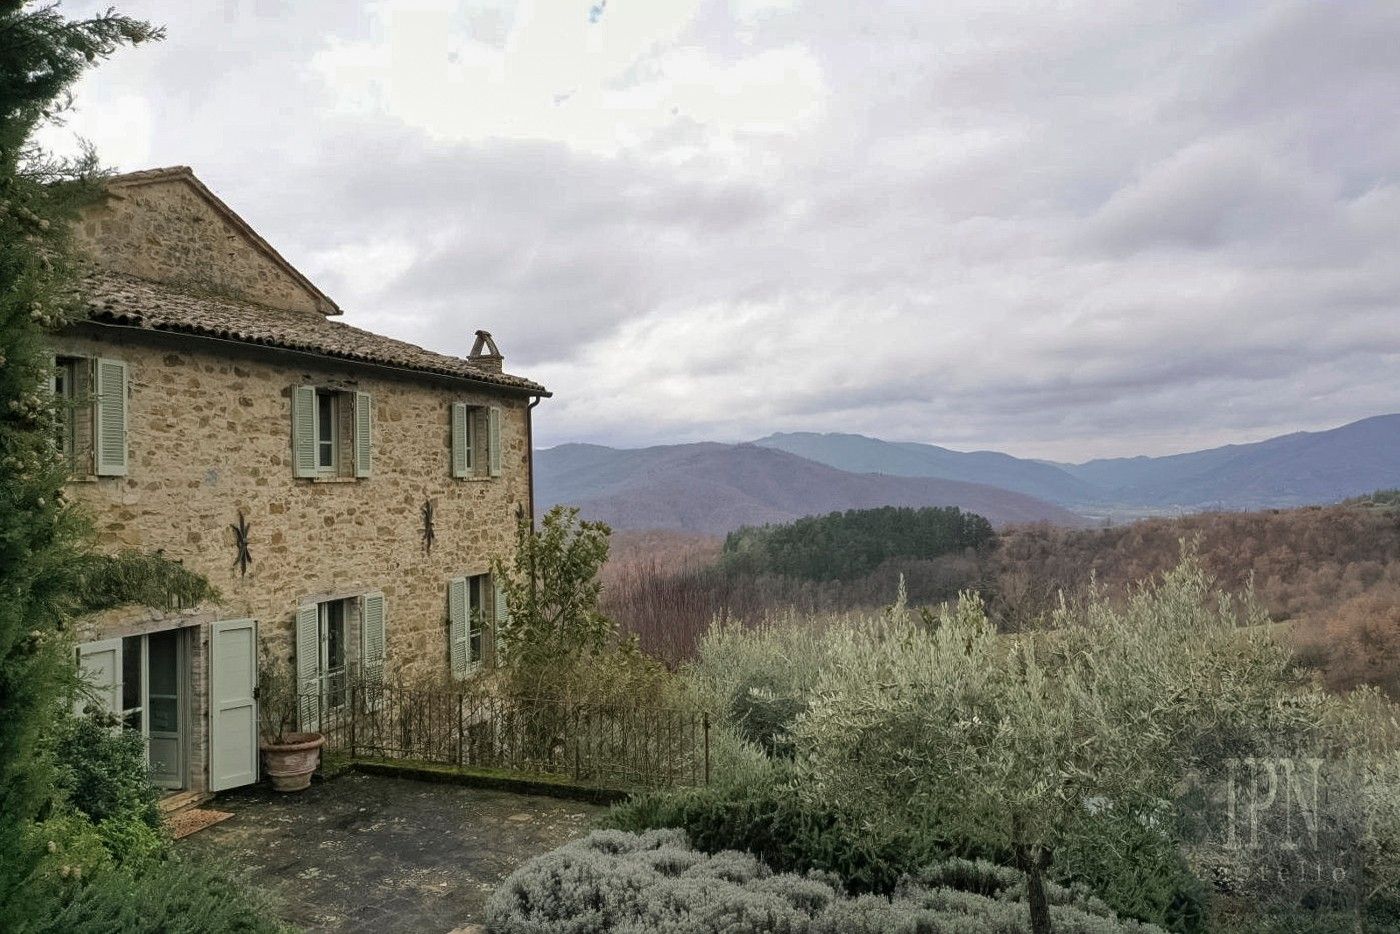 Photos Character property for sale in Umbria